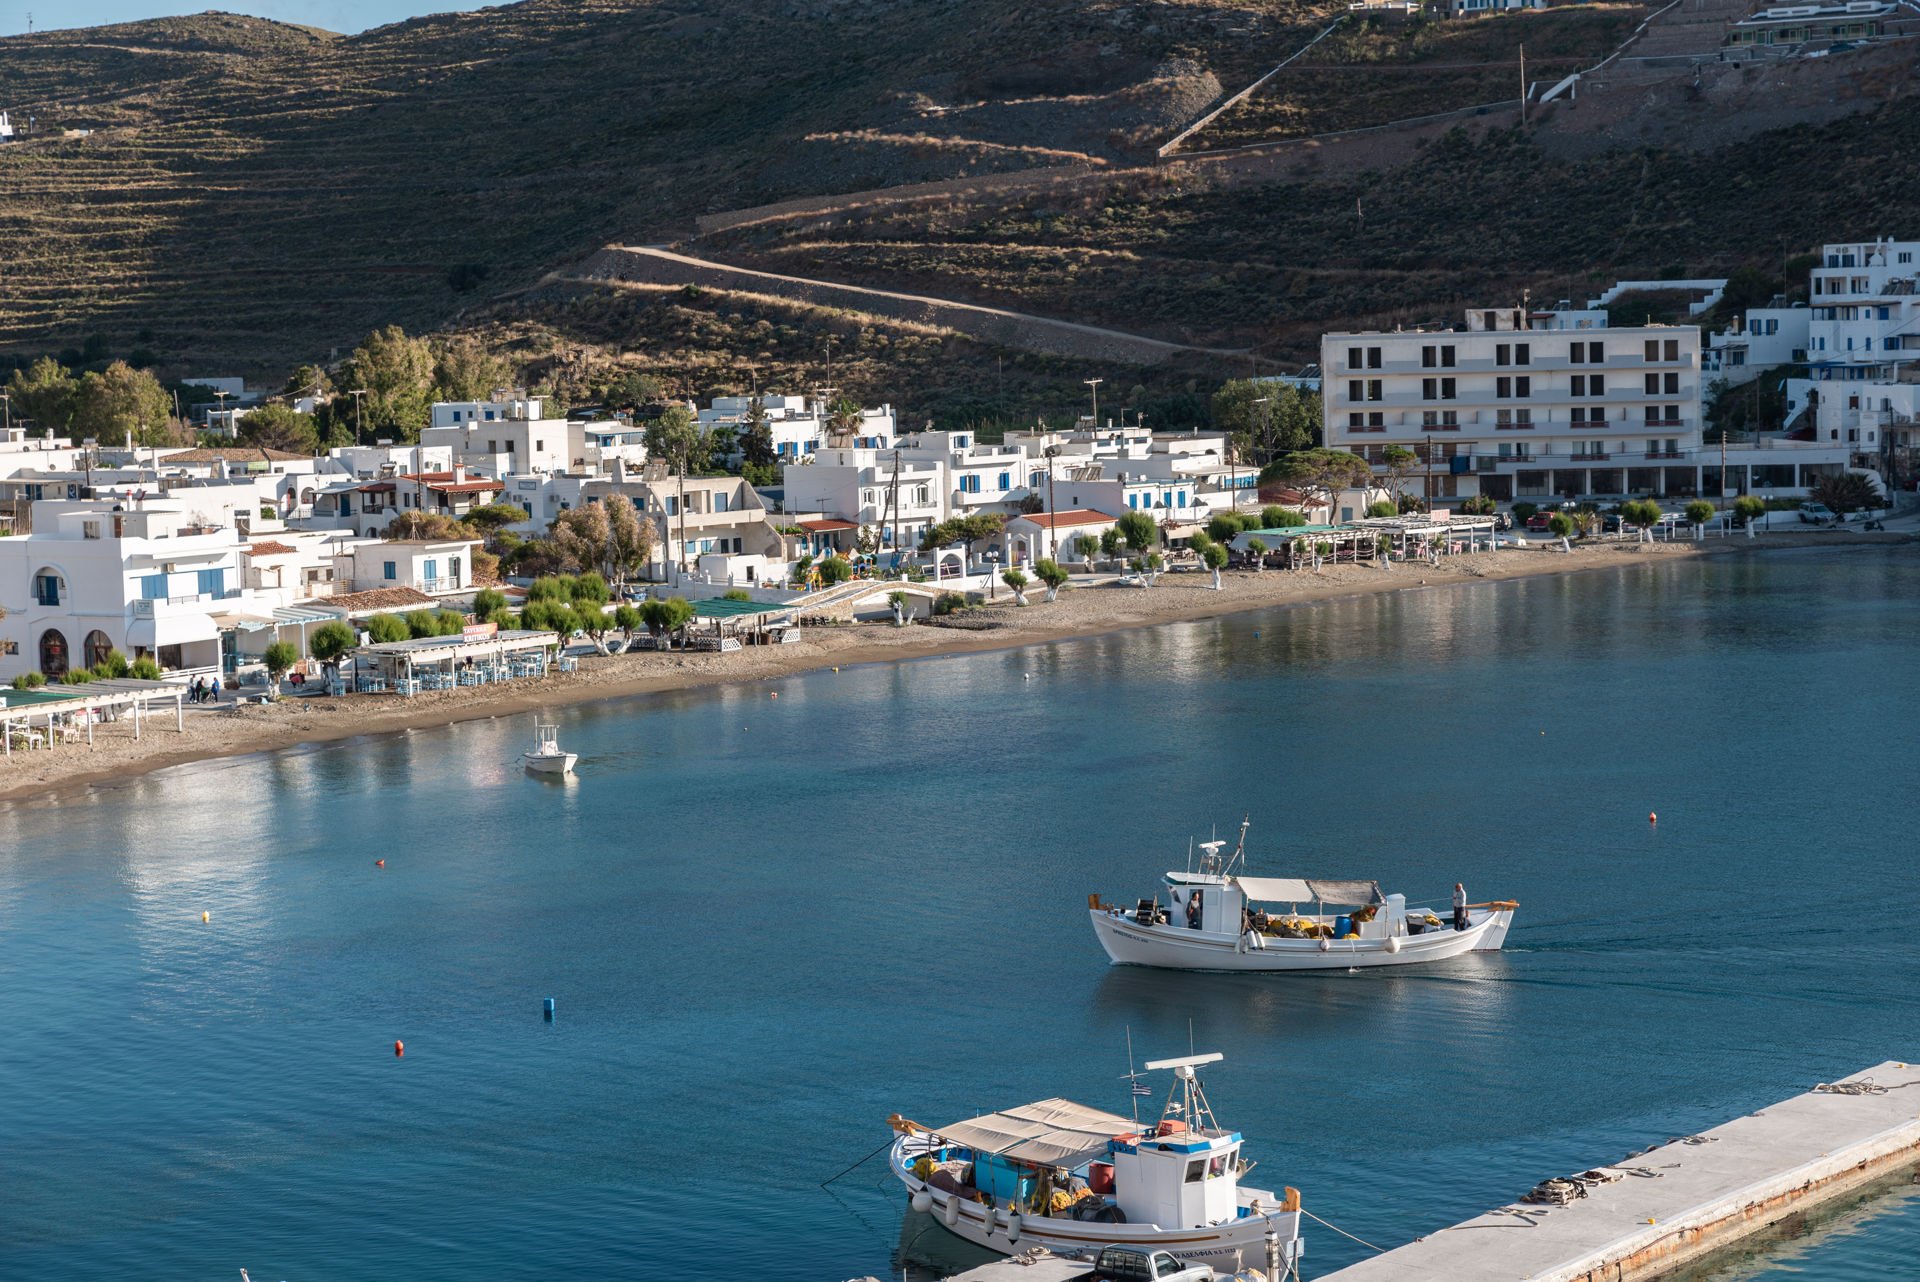 Ease into the Kythnos mood with coffee in Merichas by Stef Greece